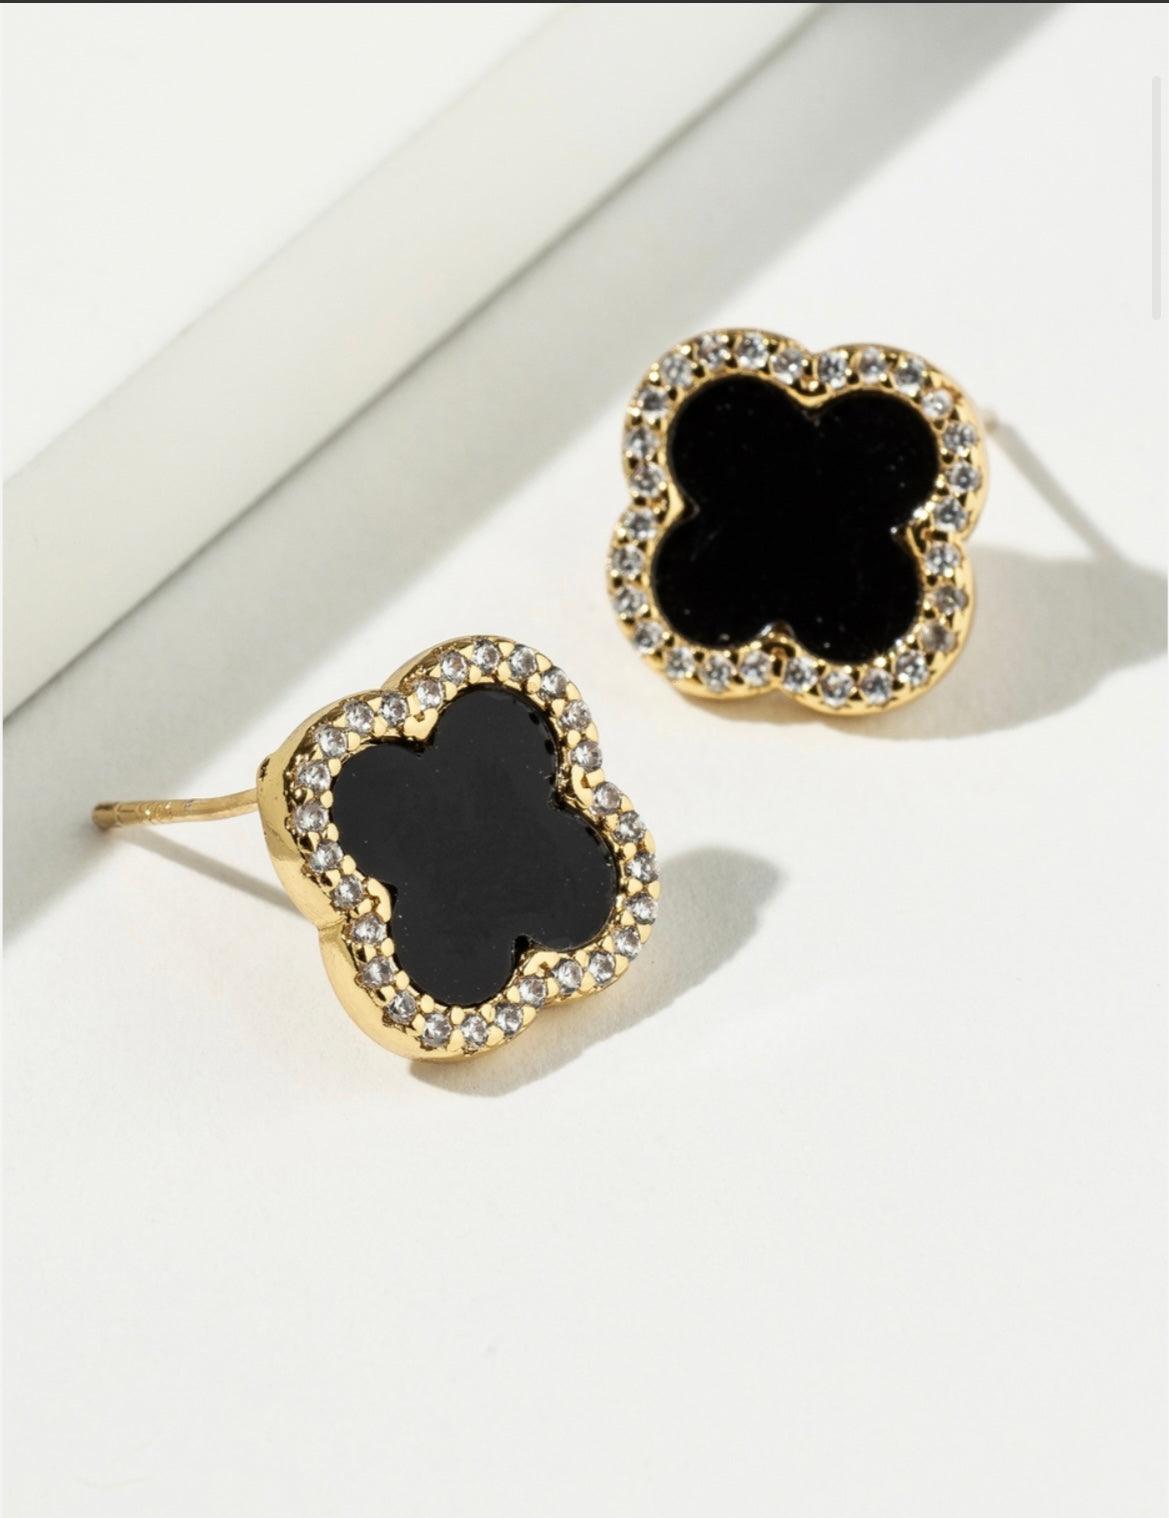 Clover Stud Earrings, Good Luck 4 Leaf Clover - Bossy Collections